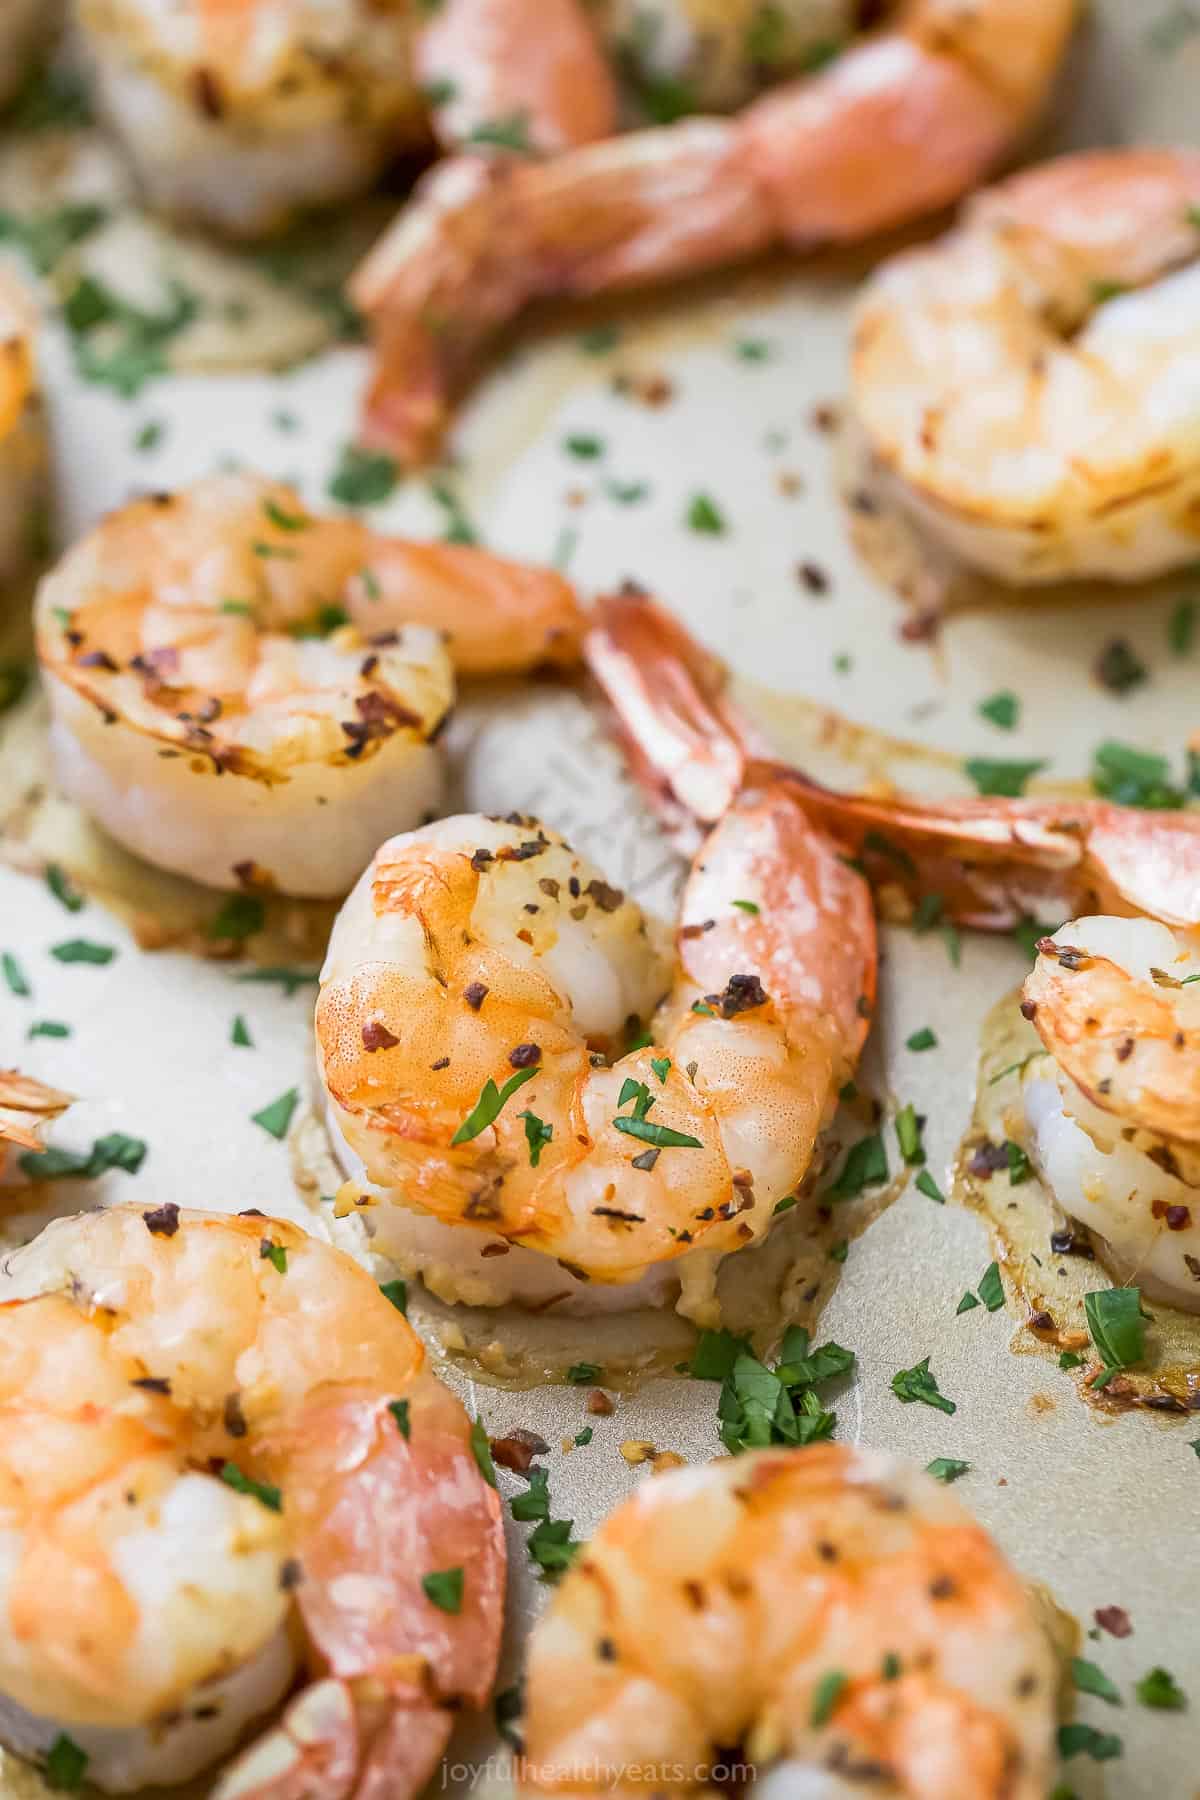 Place the grilled shrimps into the baking dish. 